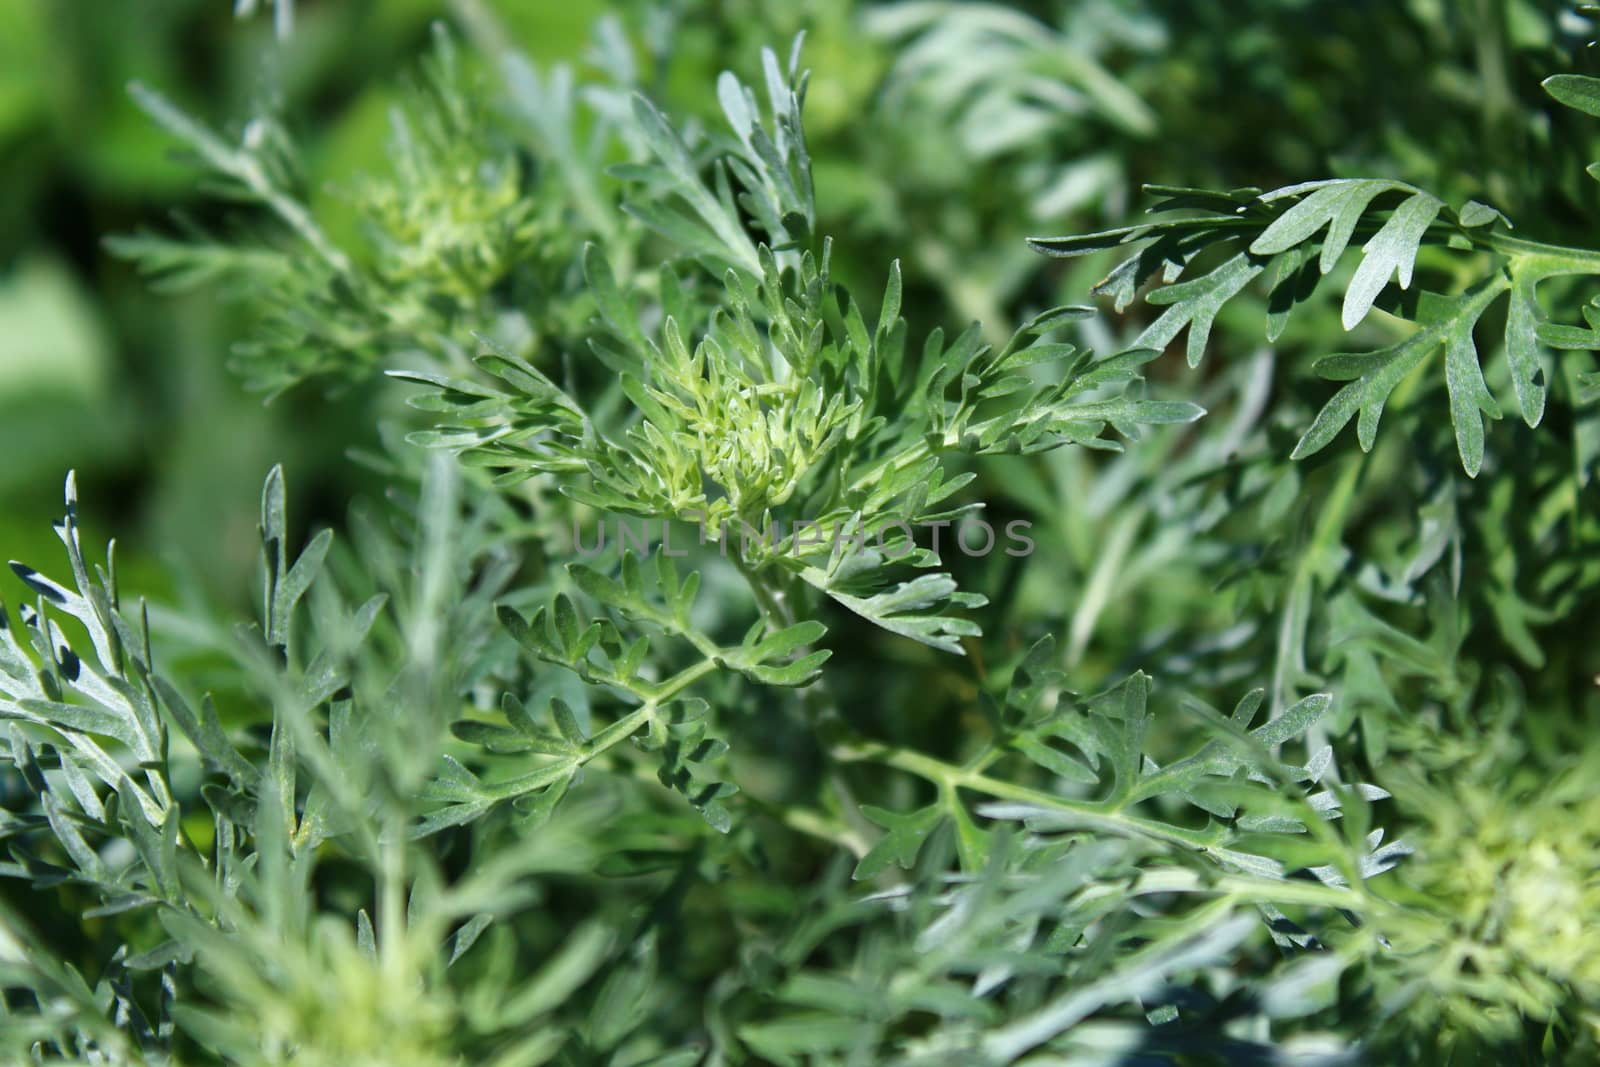 The picture shows healthy wormwood in the garden.